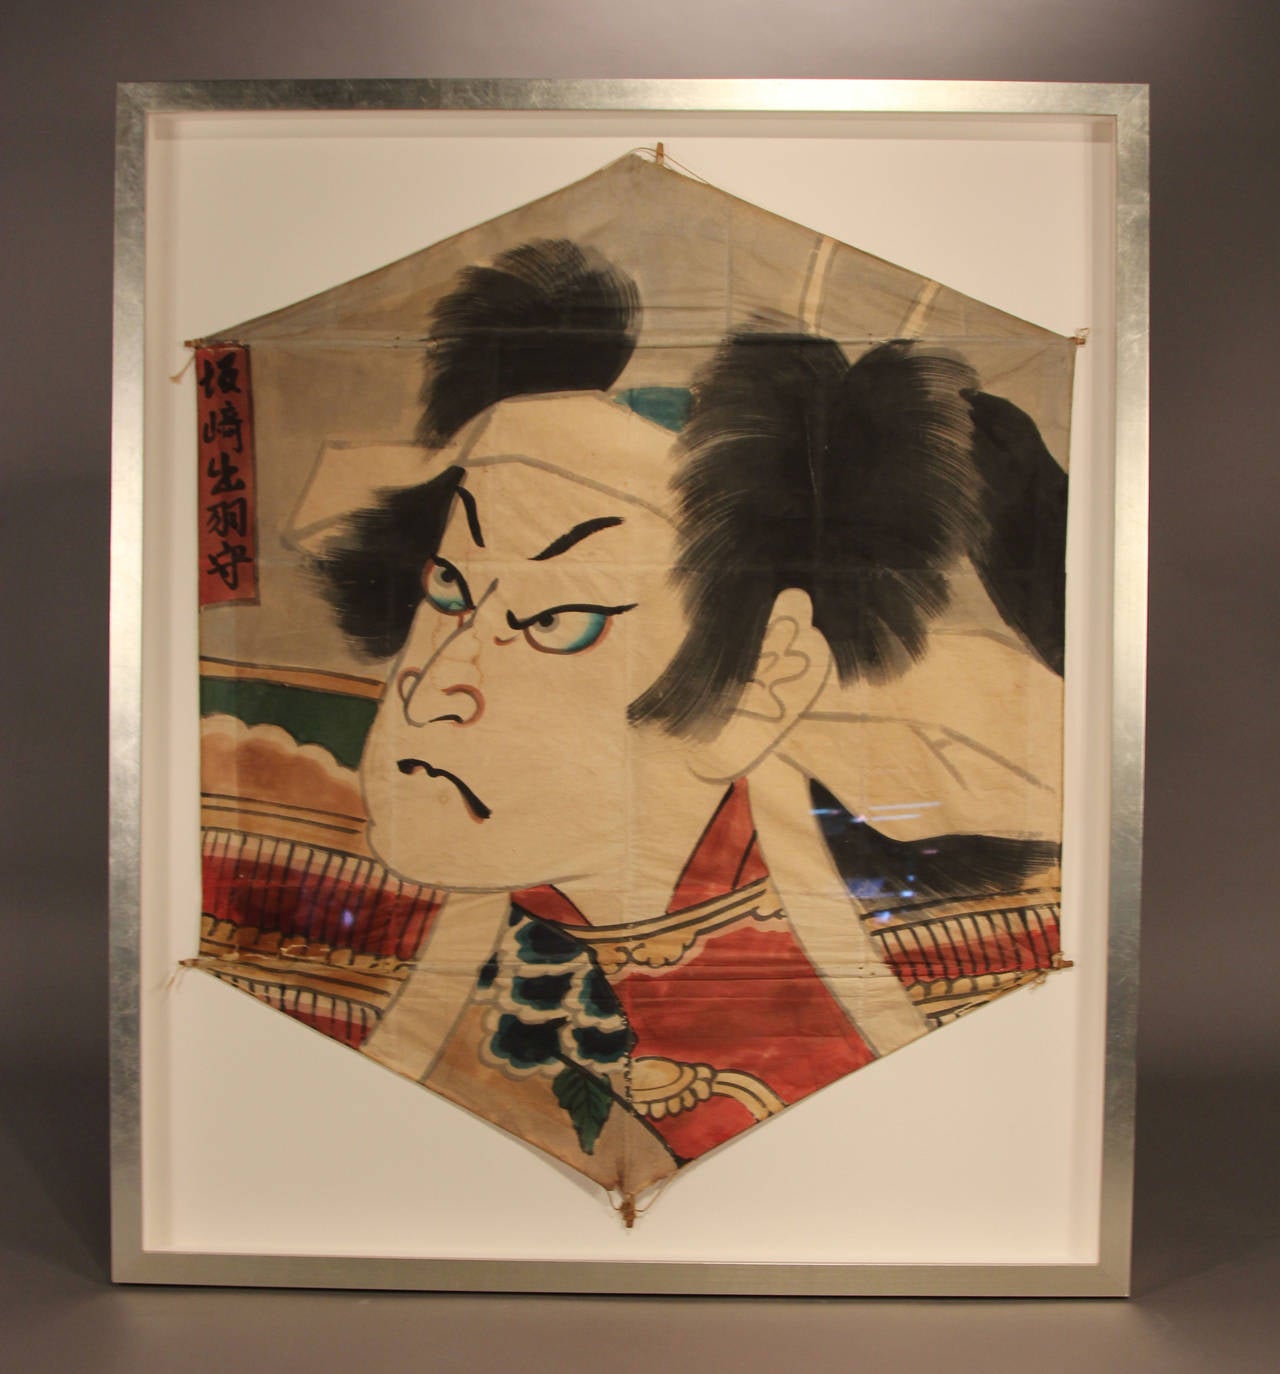 Item description: An incredible hand-painted 19th century Japanese fighting kite, this piece is a large and bold work of art in every way. A traditional “fighting kite” is brush painted with bright colored natural dyes and black ink on washi